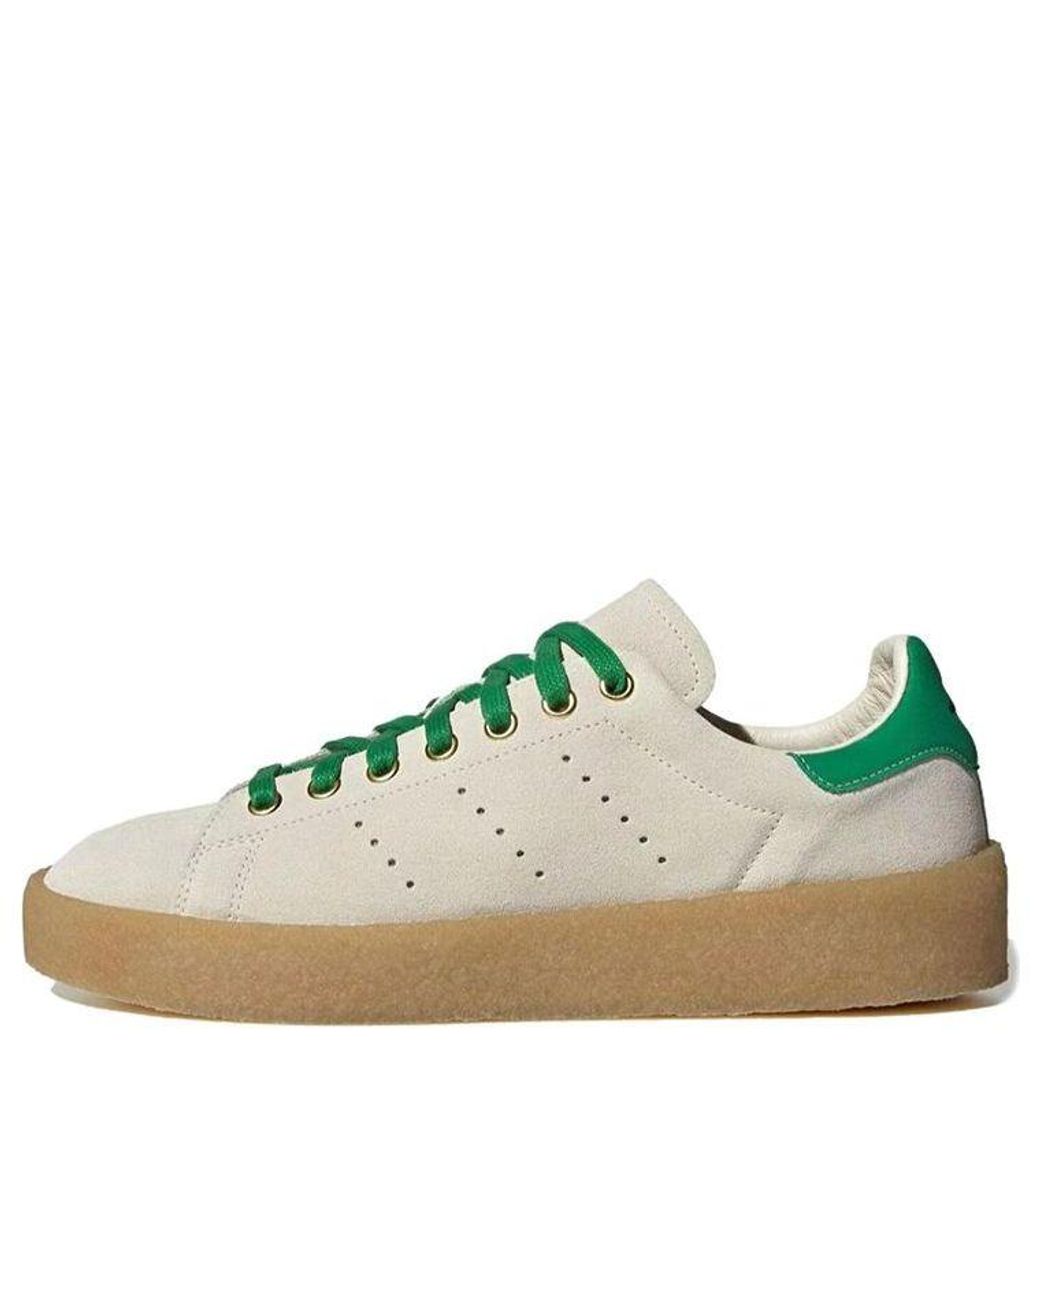 Elskede Derfor Credential adidas Originals Stan Smith Crepe Low Shoes 'off White Green' for Men | Lyst